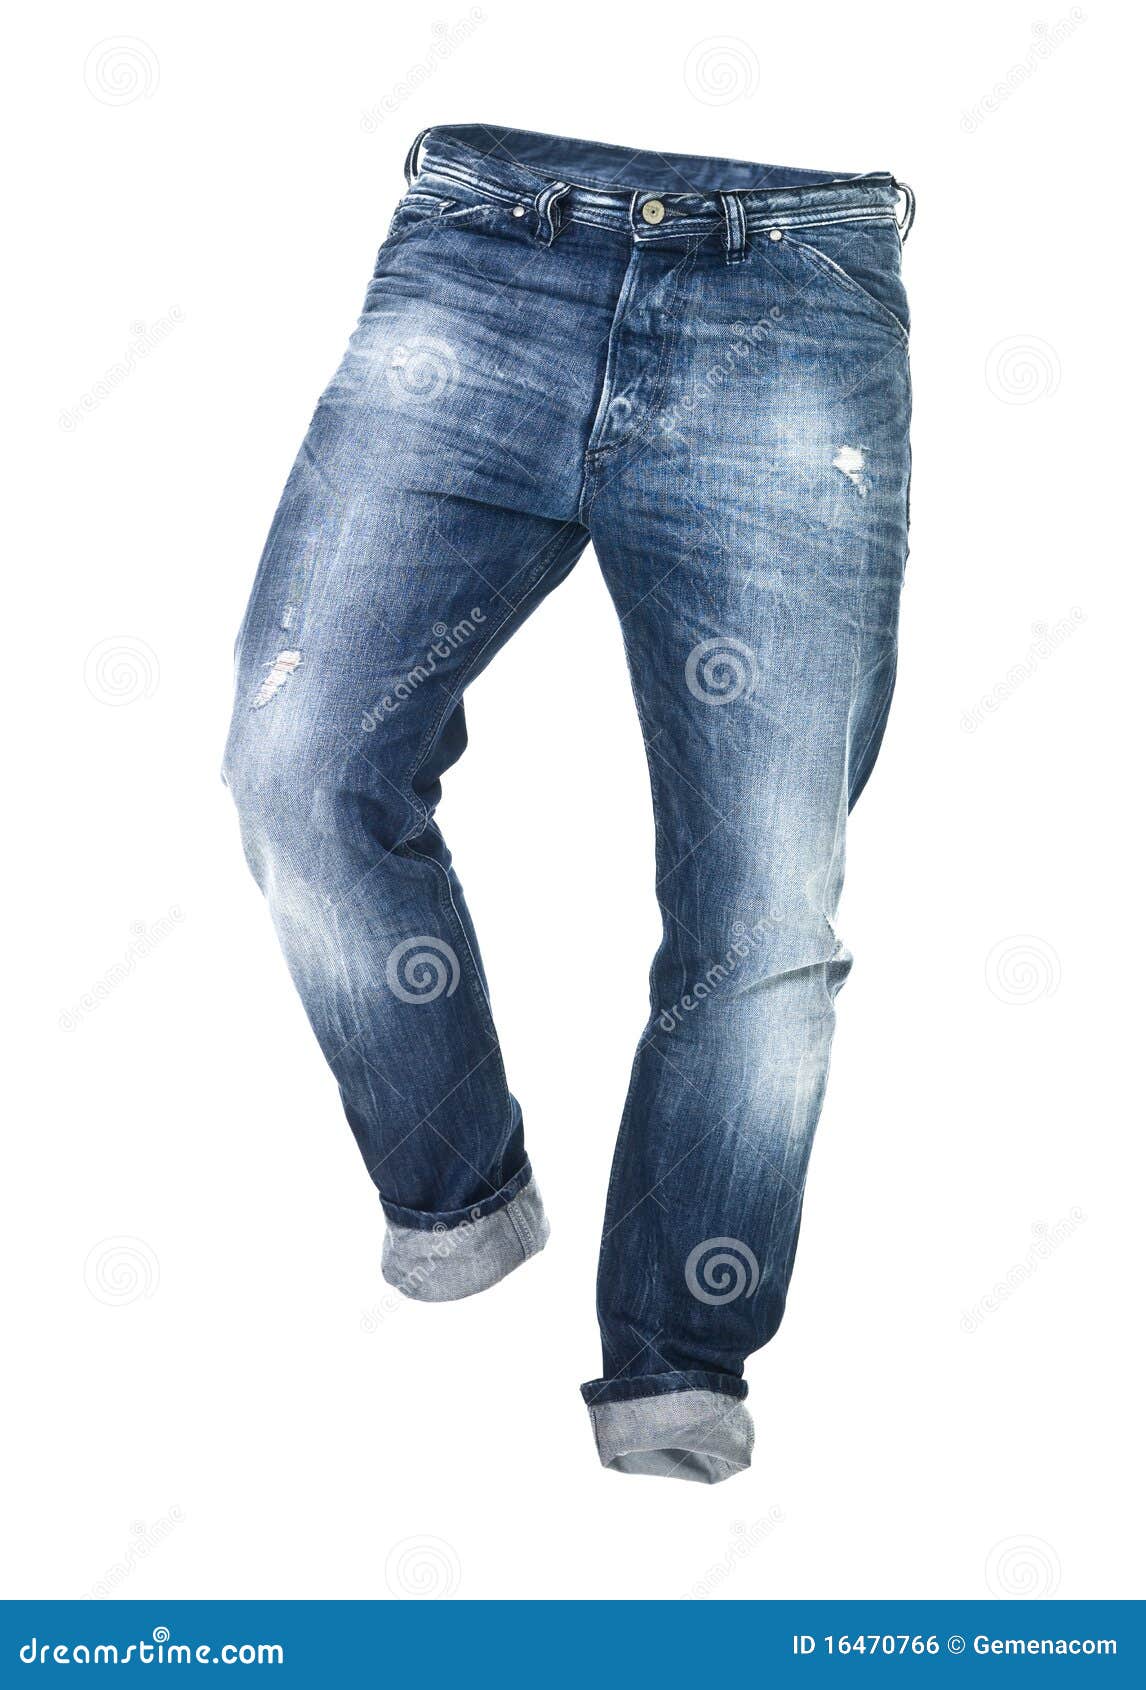 Worn blue jeans isolated stock photo. Image of comfortable - 16470766